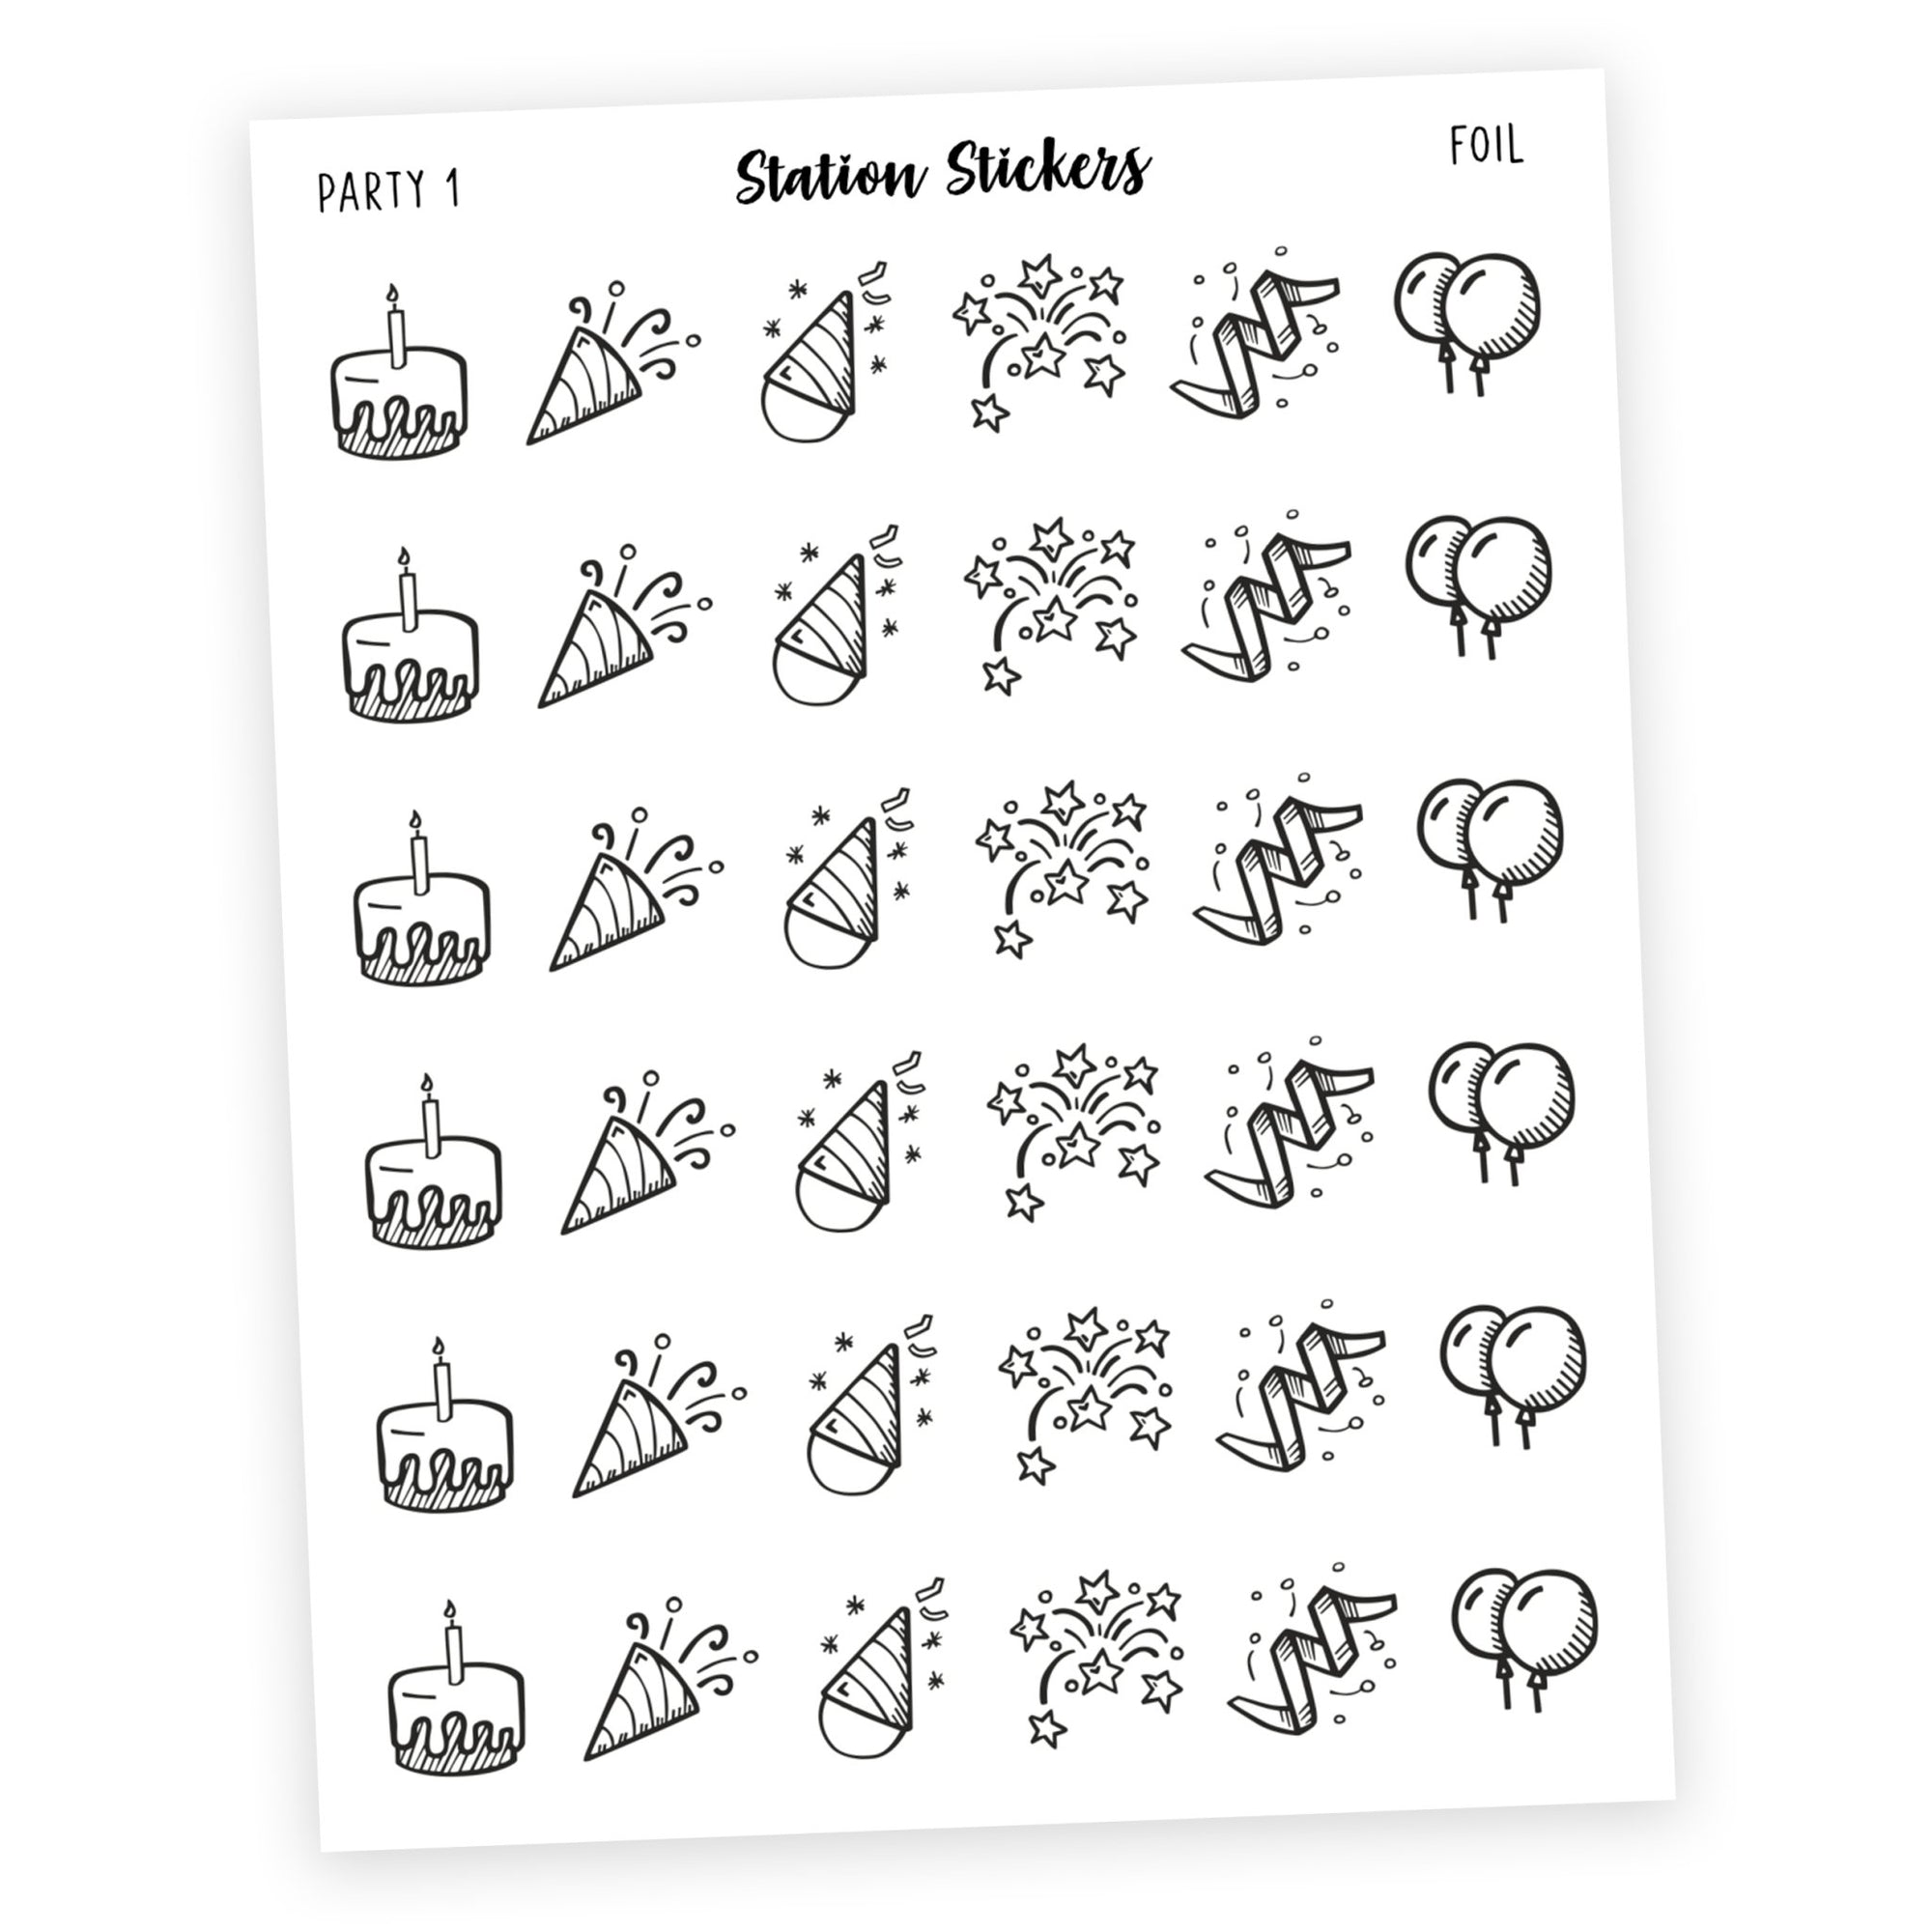 PARTY 1 • ICONS - Station Stickers